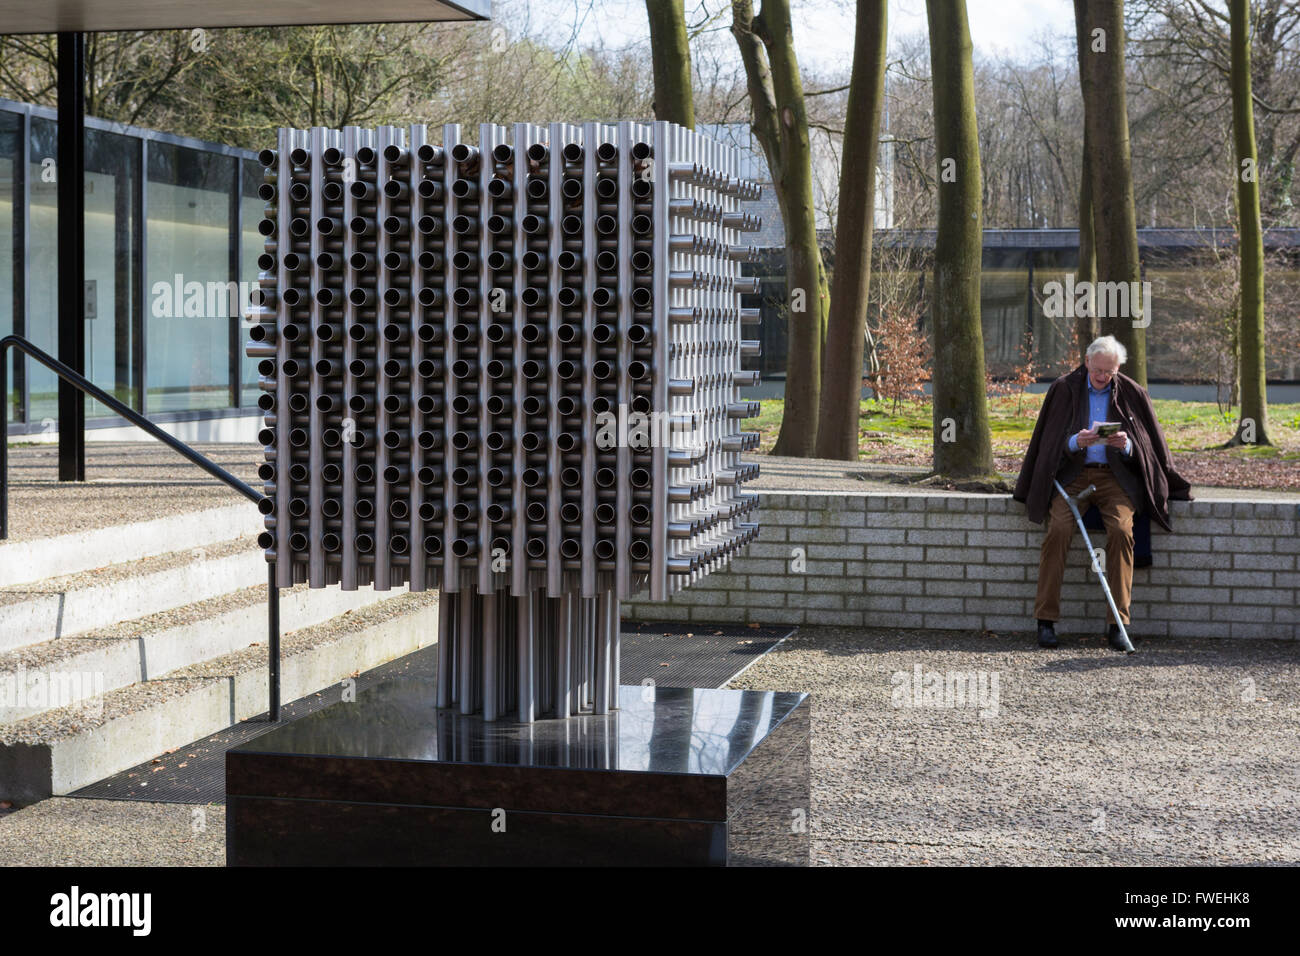 Man viewing a sculpture by André Volten at the Kröller-Müller Museum in the Hoge Veluwe National Park, Netherlands Stock Photo